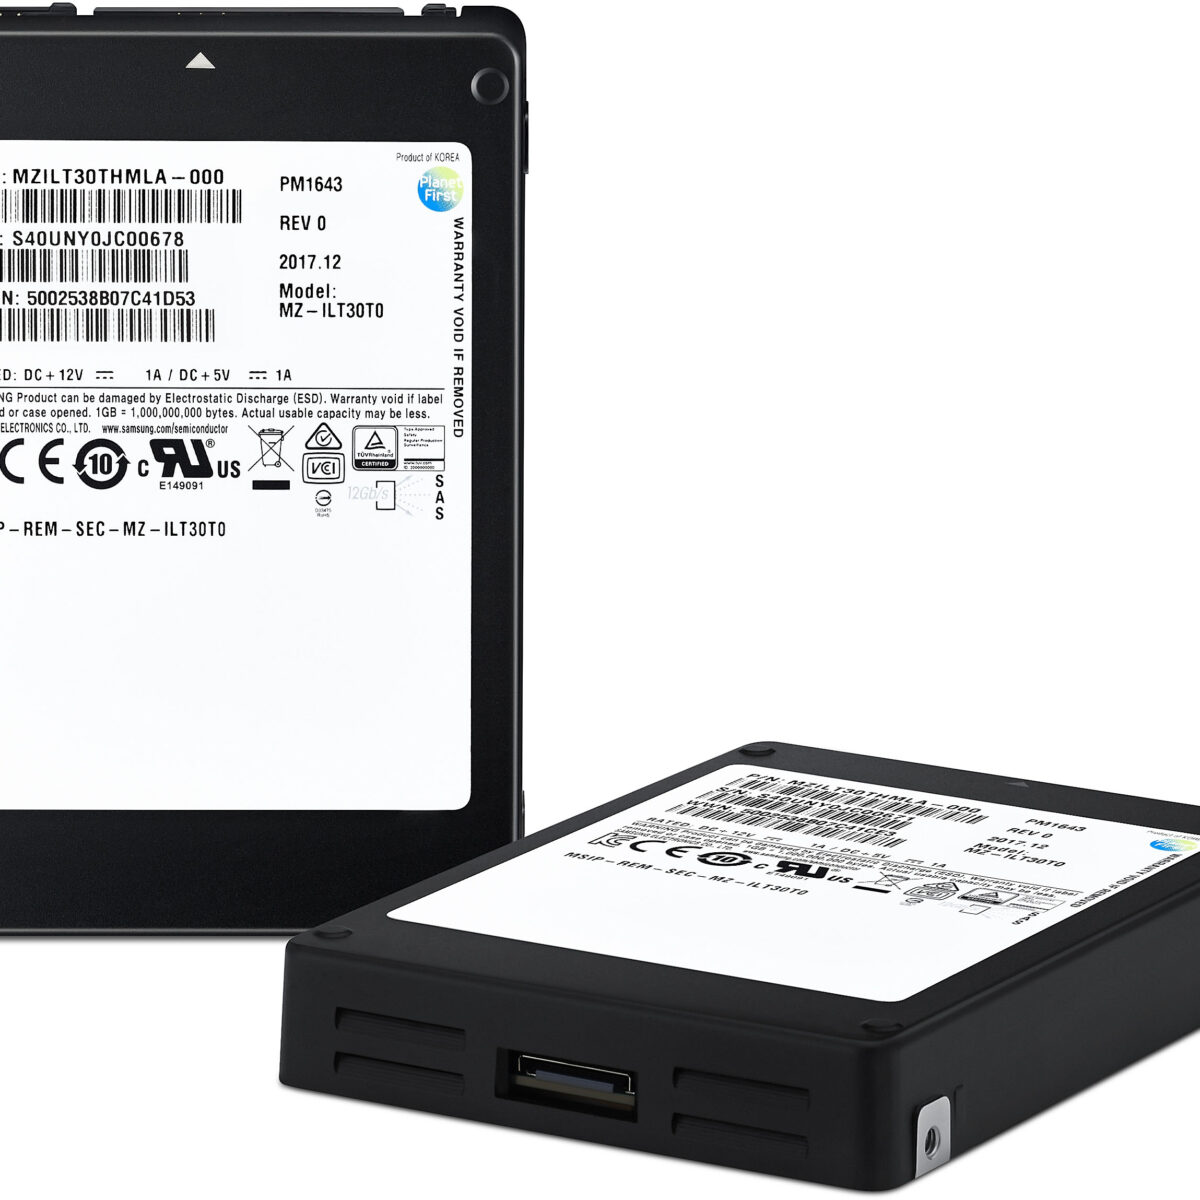 Samsung 30TB 2.5-inch SSD Mixed View